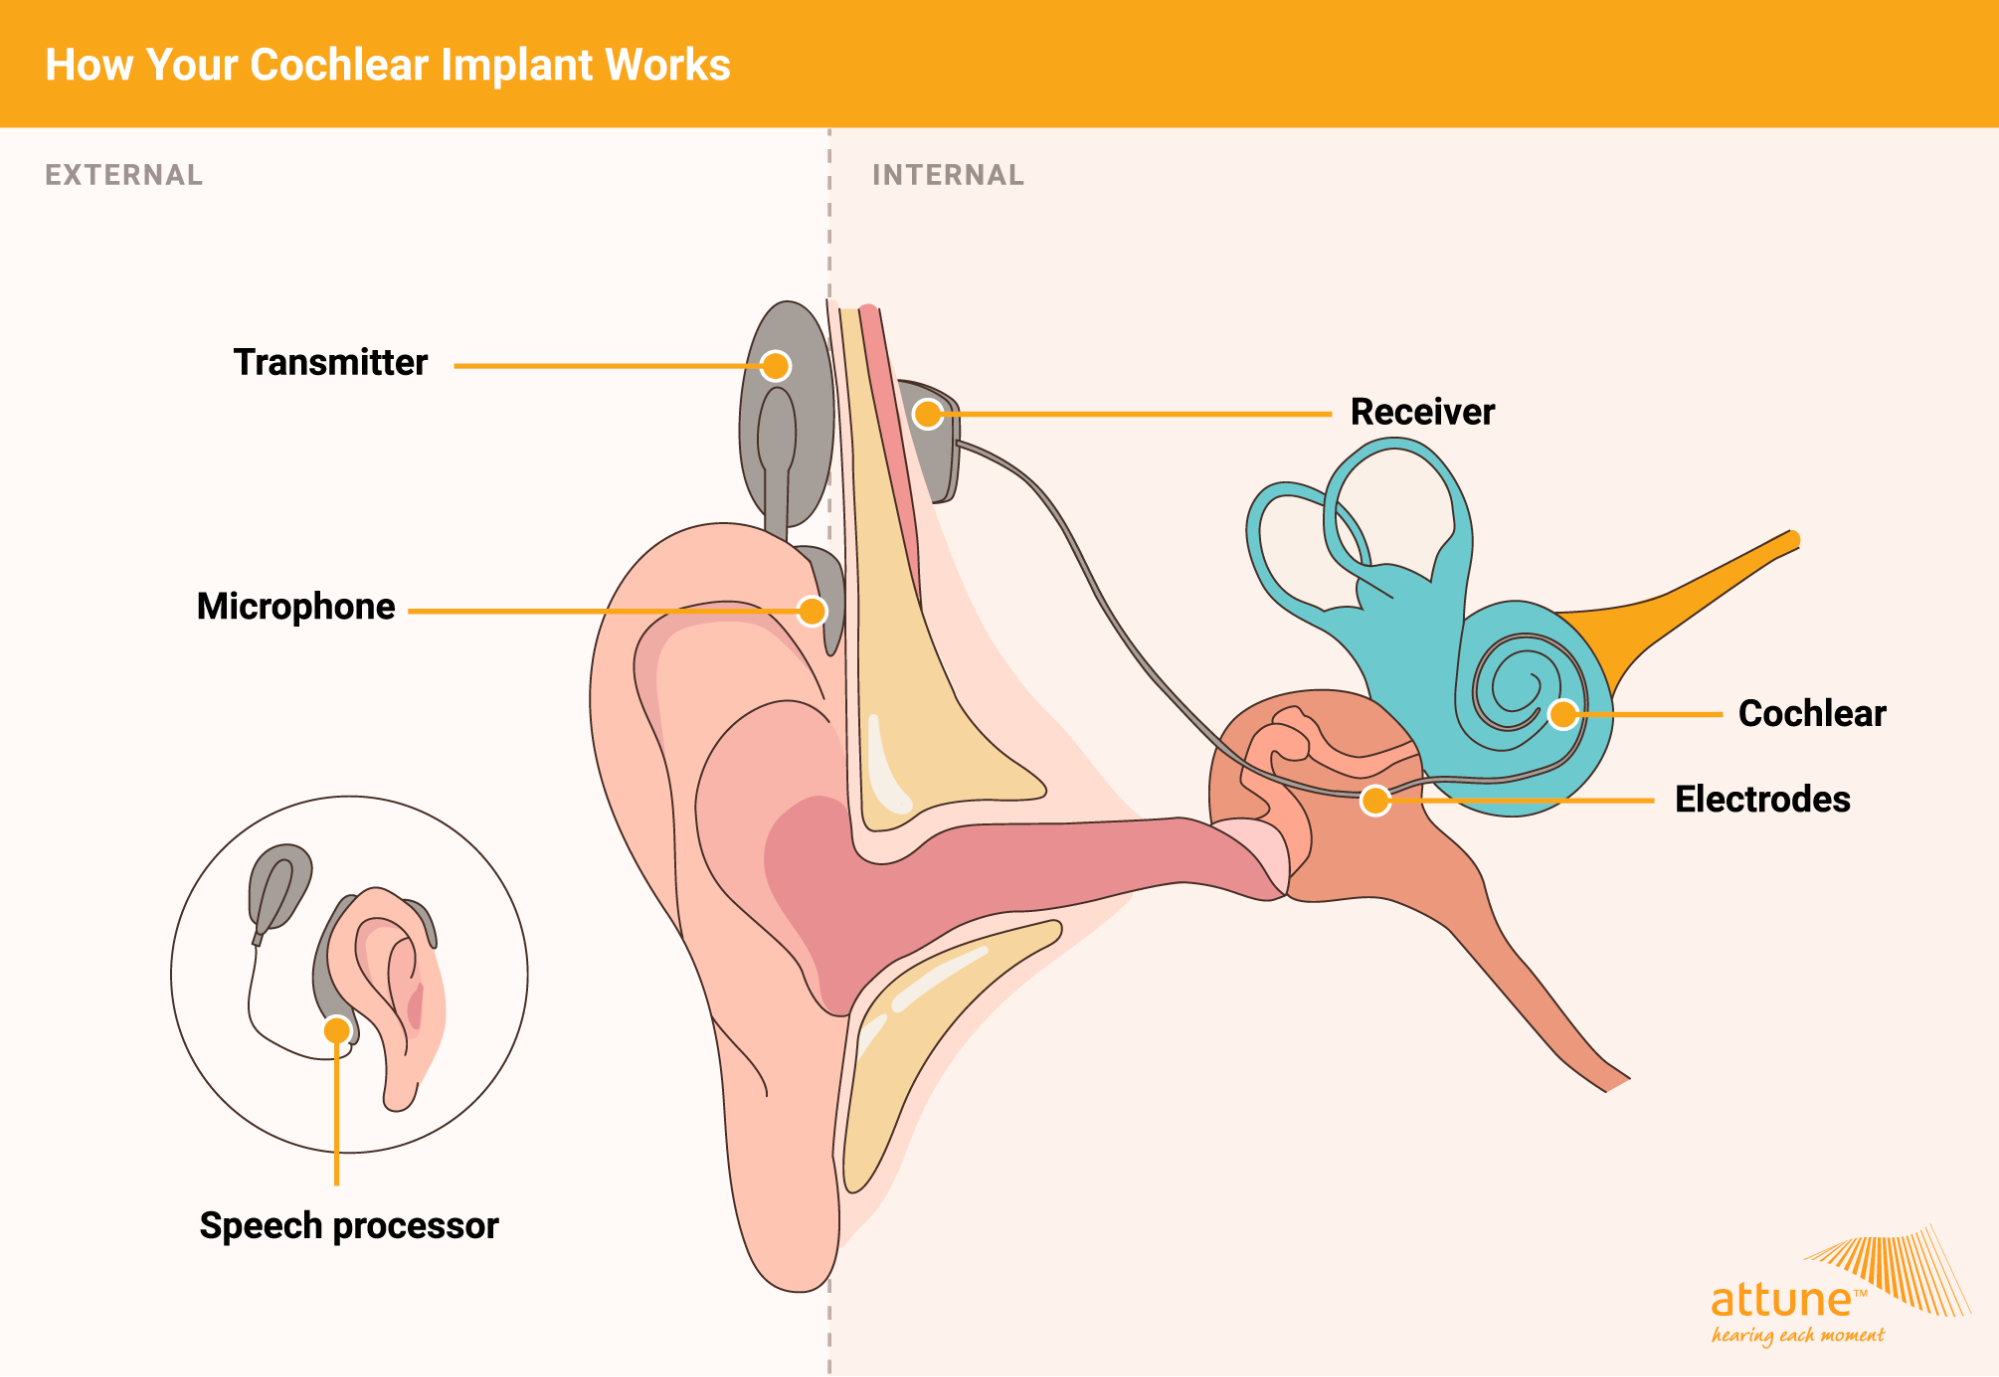 What Are Cochlear Implants